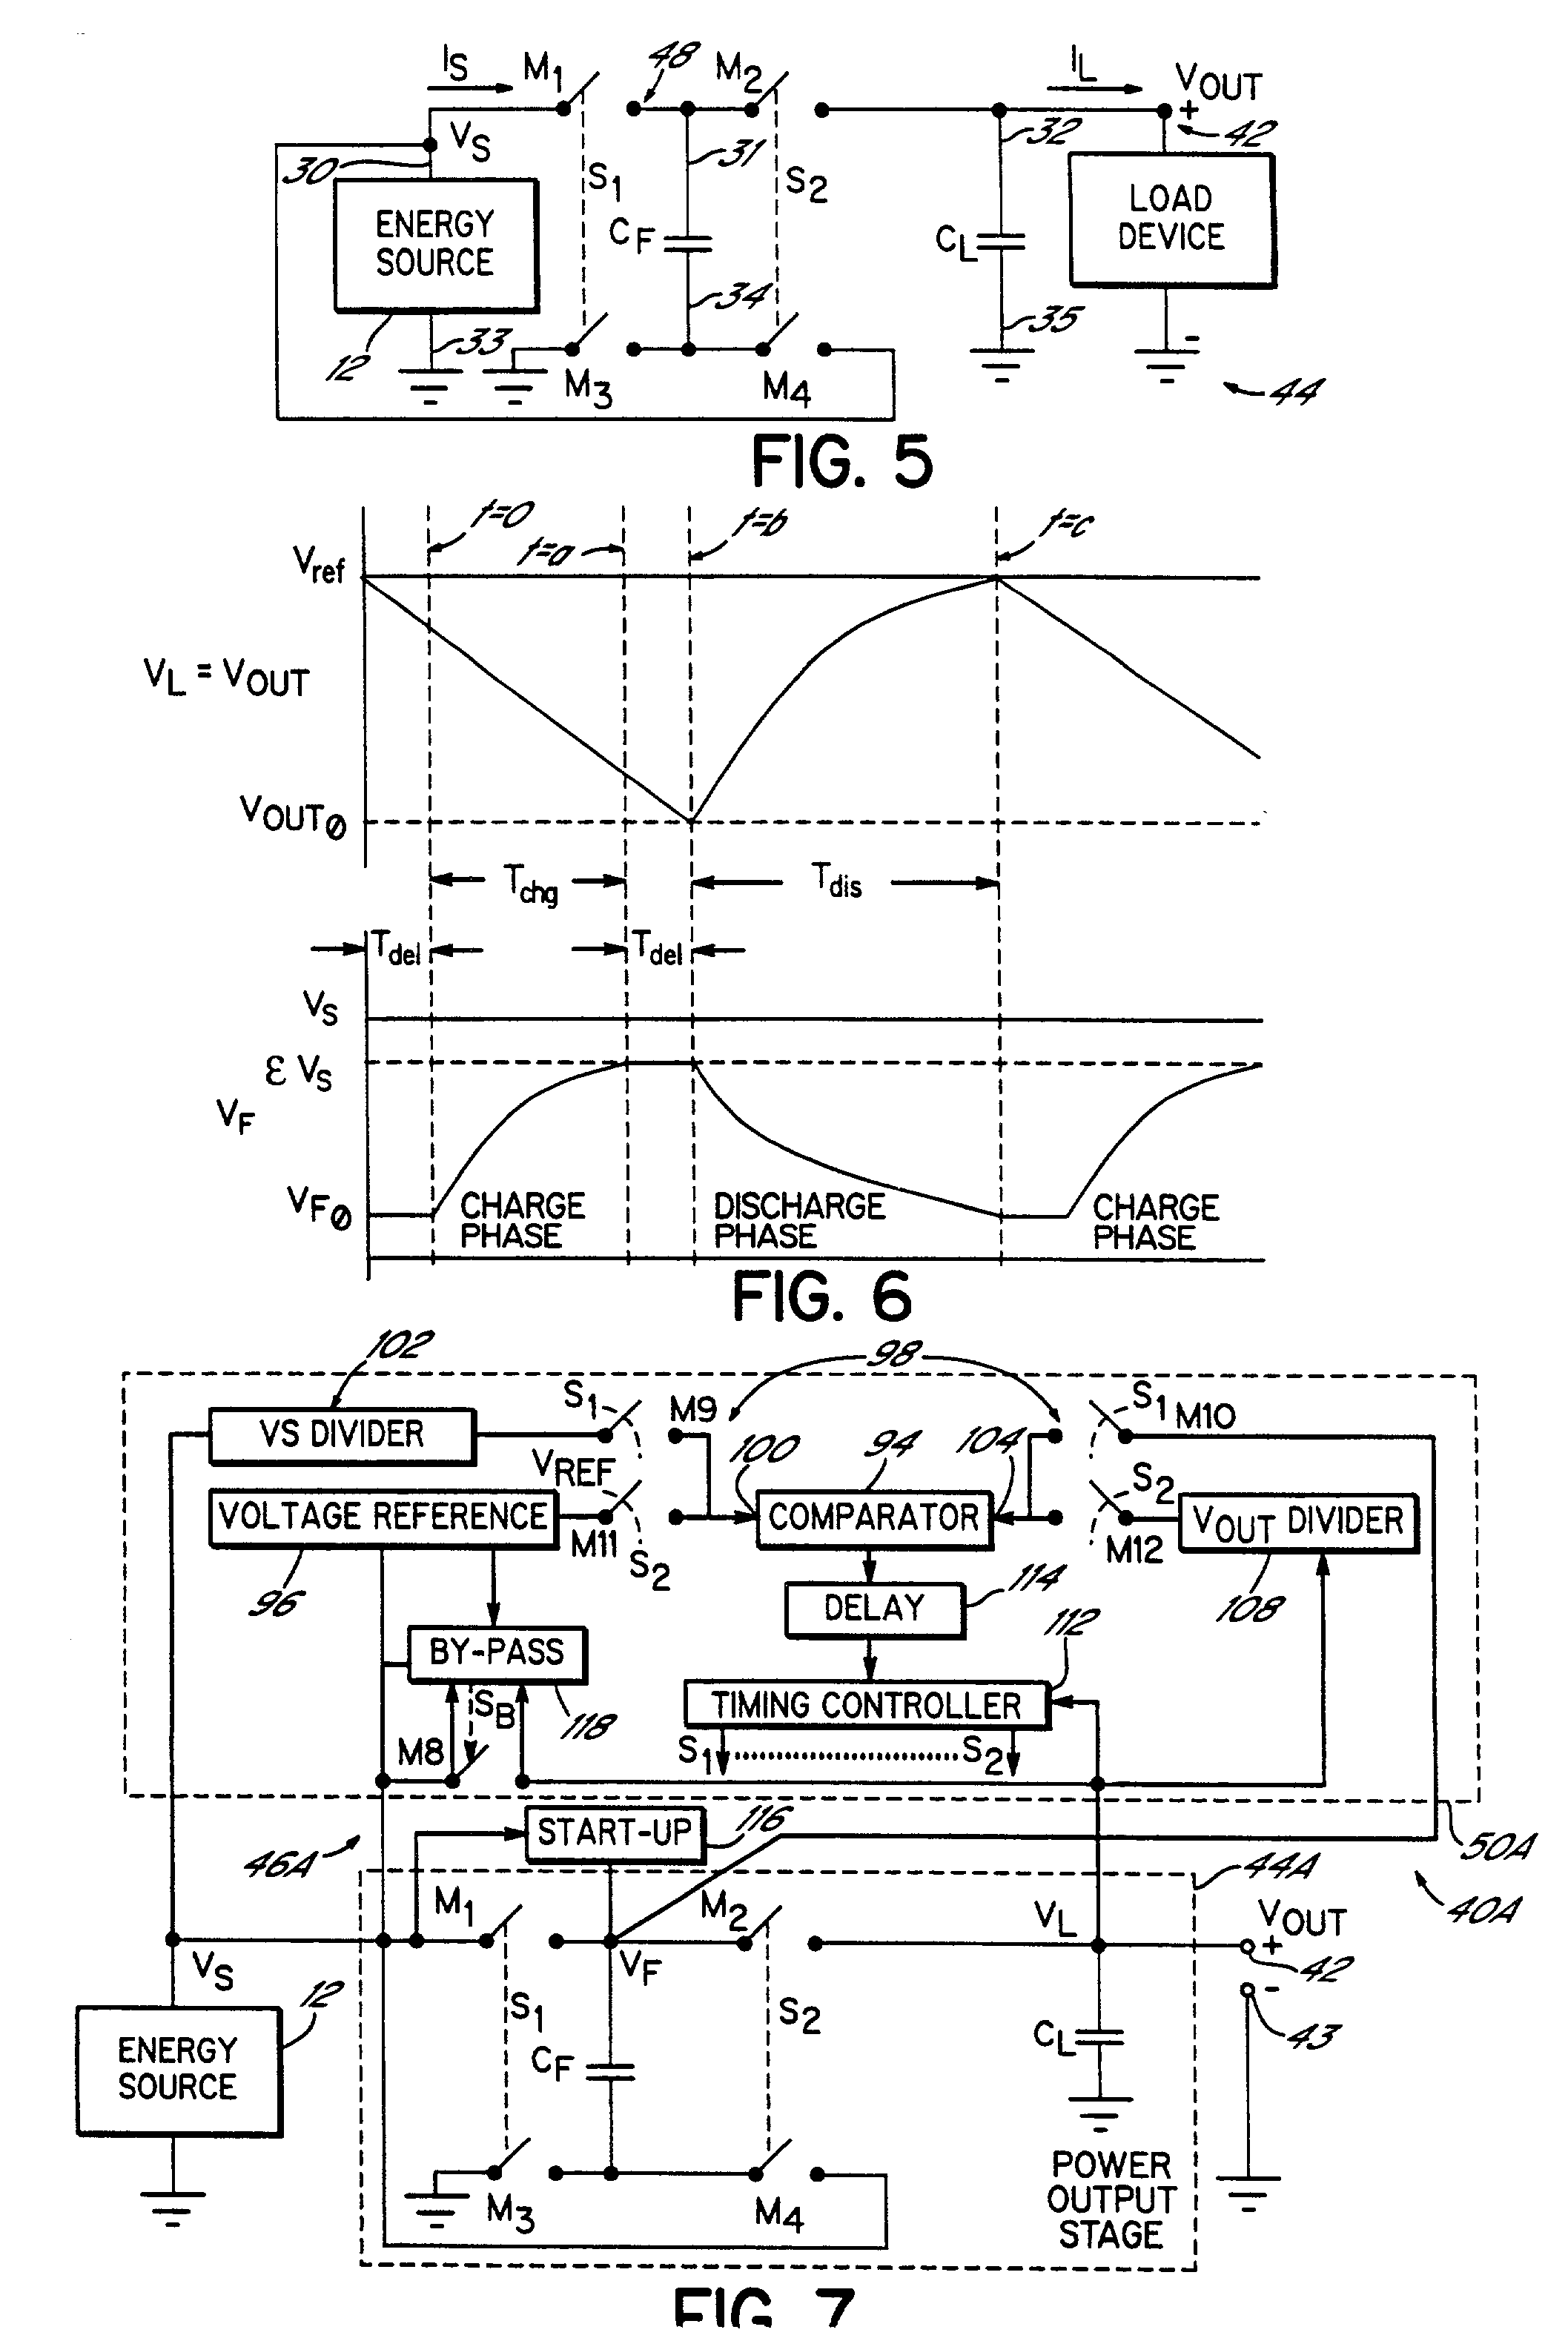 Progressive start-up circuit for activating a charge pump